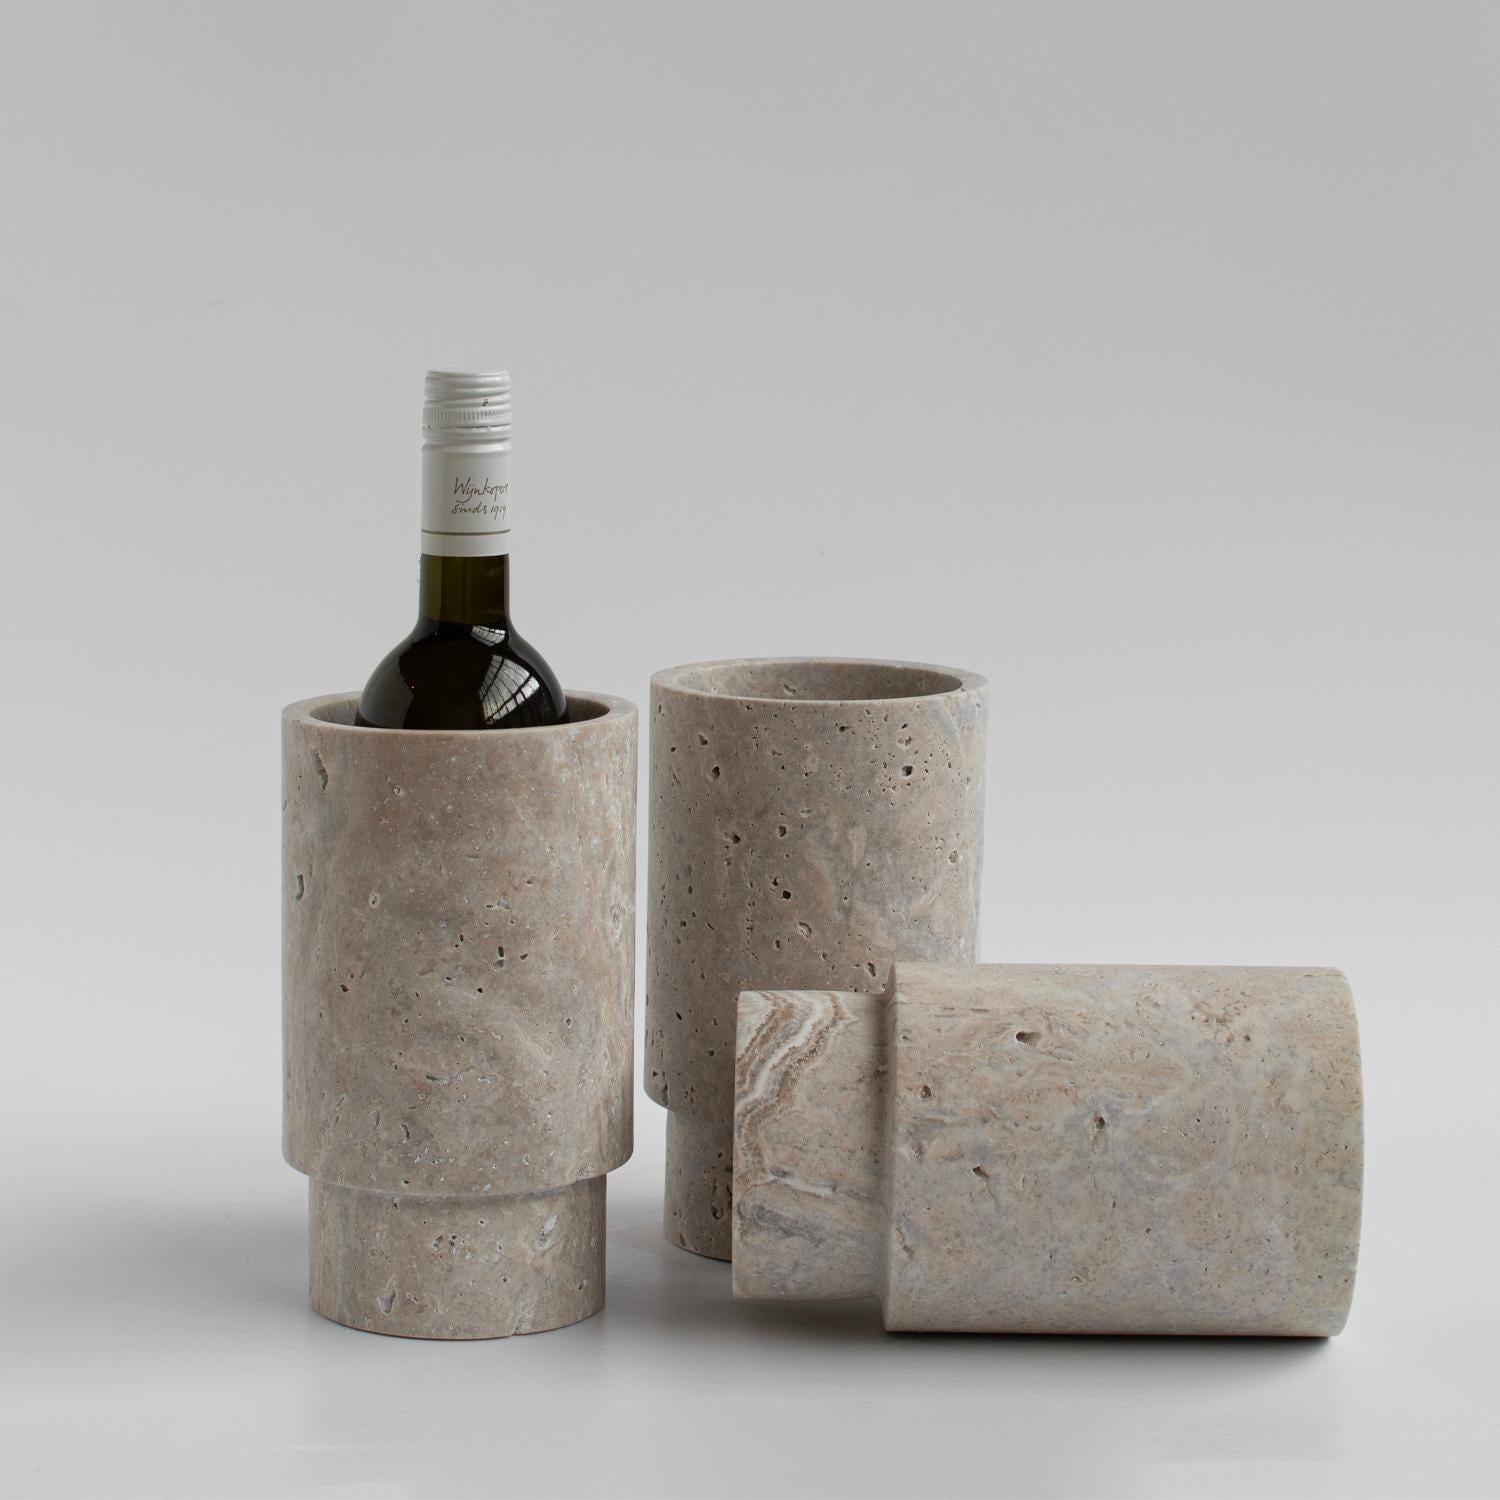 Our silver travertine vase is designed by us and hand crafted by the artisans within the fair-trade principles.

Crafted from a natural travertine stone, this vase will be sure to win your heart. It can be used to hold your wine bottle, blooms,